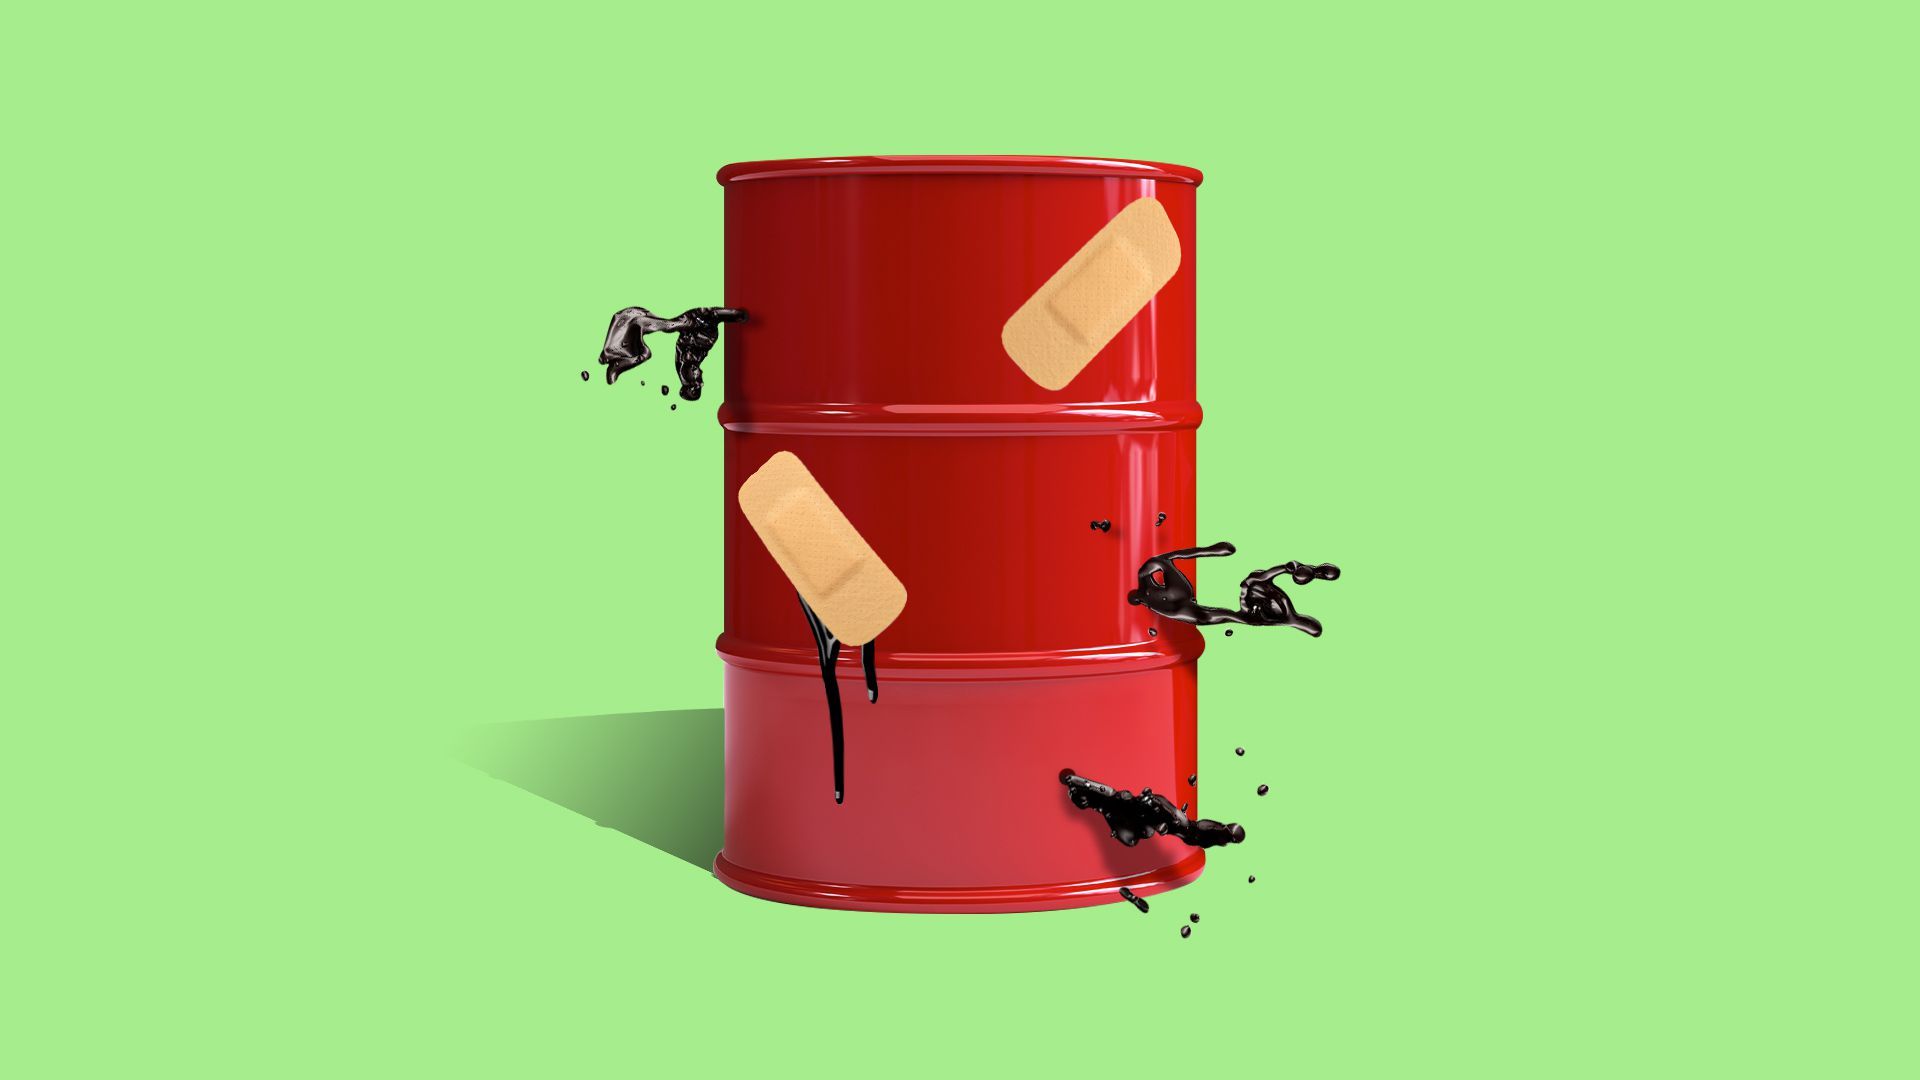 Illustration of a leaky oil barrel with band aids pasted randomly over leaking holes. 